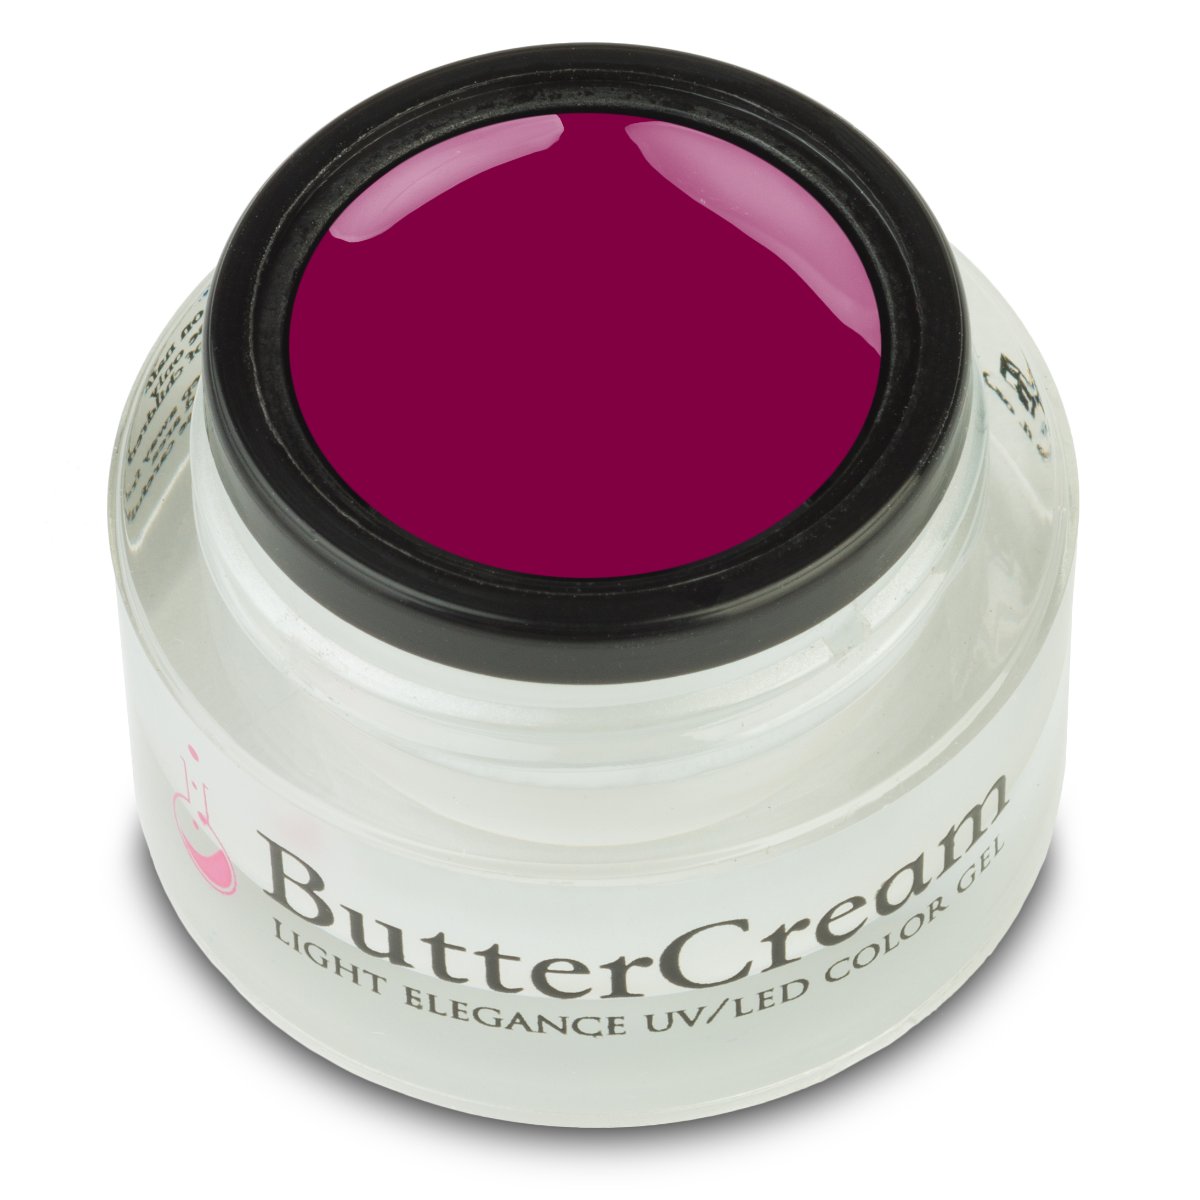 Positively Charged ButterCream